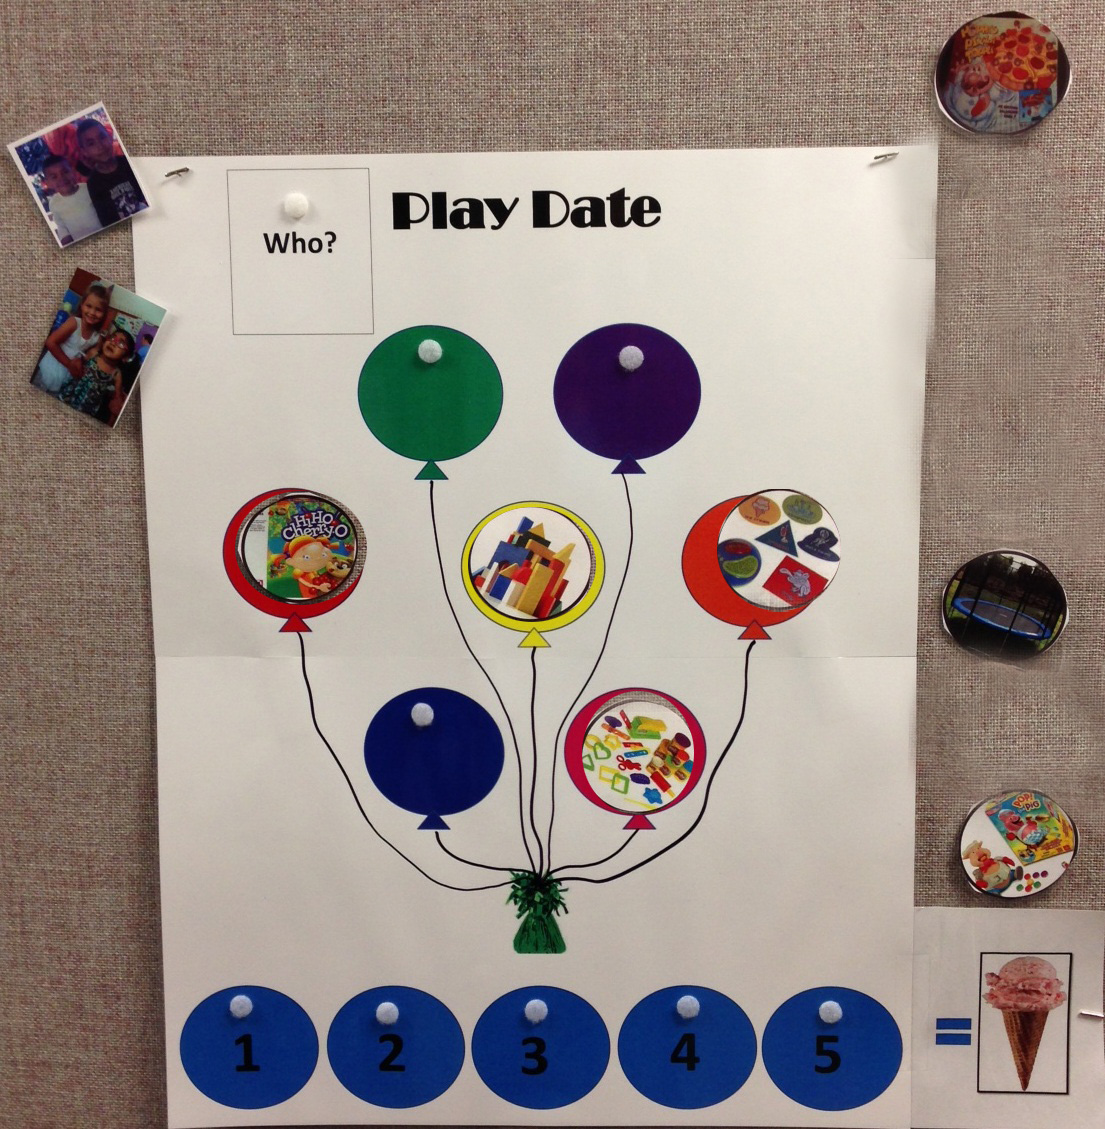 poster of play date visual with balloons in the middle. In each balloon is a picture of a play date activity such as blocks. The pictures are velcroed in each balloon. Along the bottom are circles numbered 1 through 5.